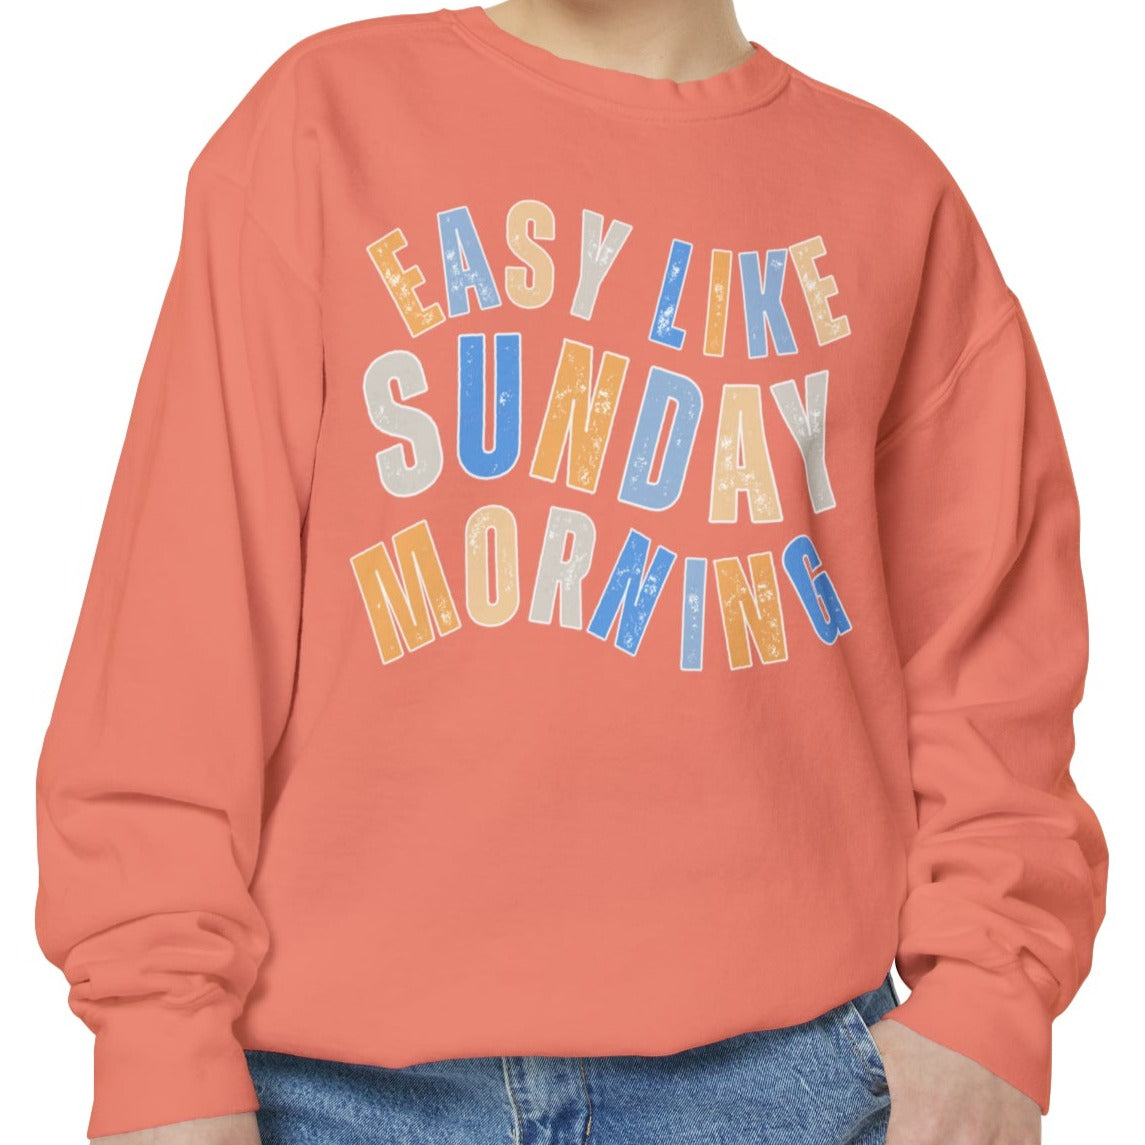 Easy Like Sunday Morning Cozy Comfort Colors Women's Sweatshirt - Relax in Style - Eddy and Rita